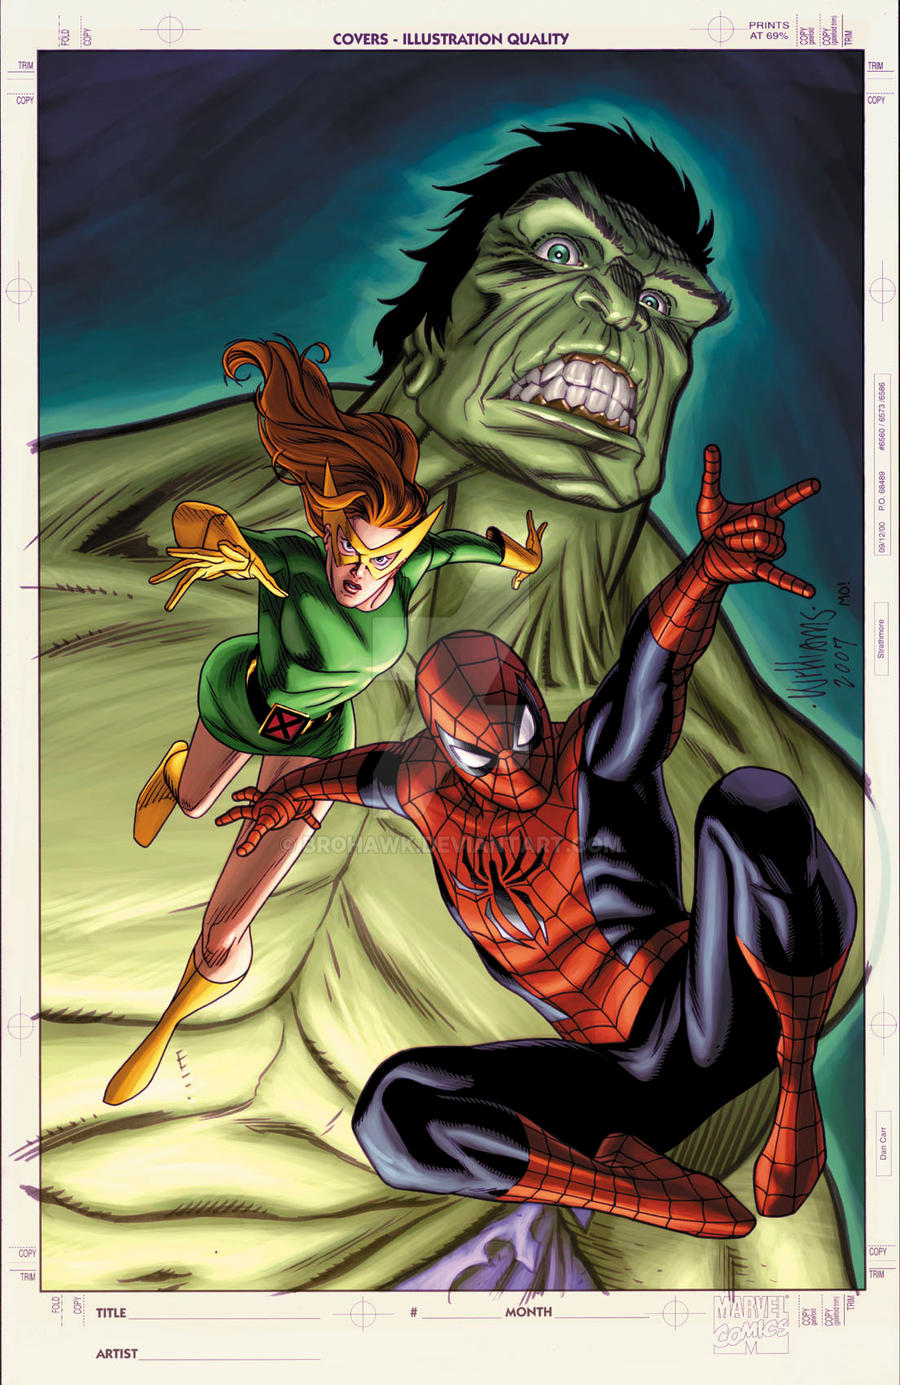 Unused Spiderman Family cover by BroHawk on DeviantArt